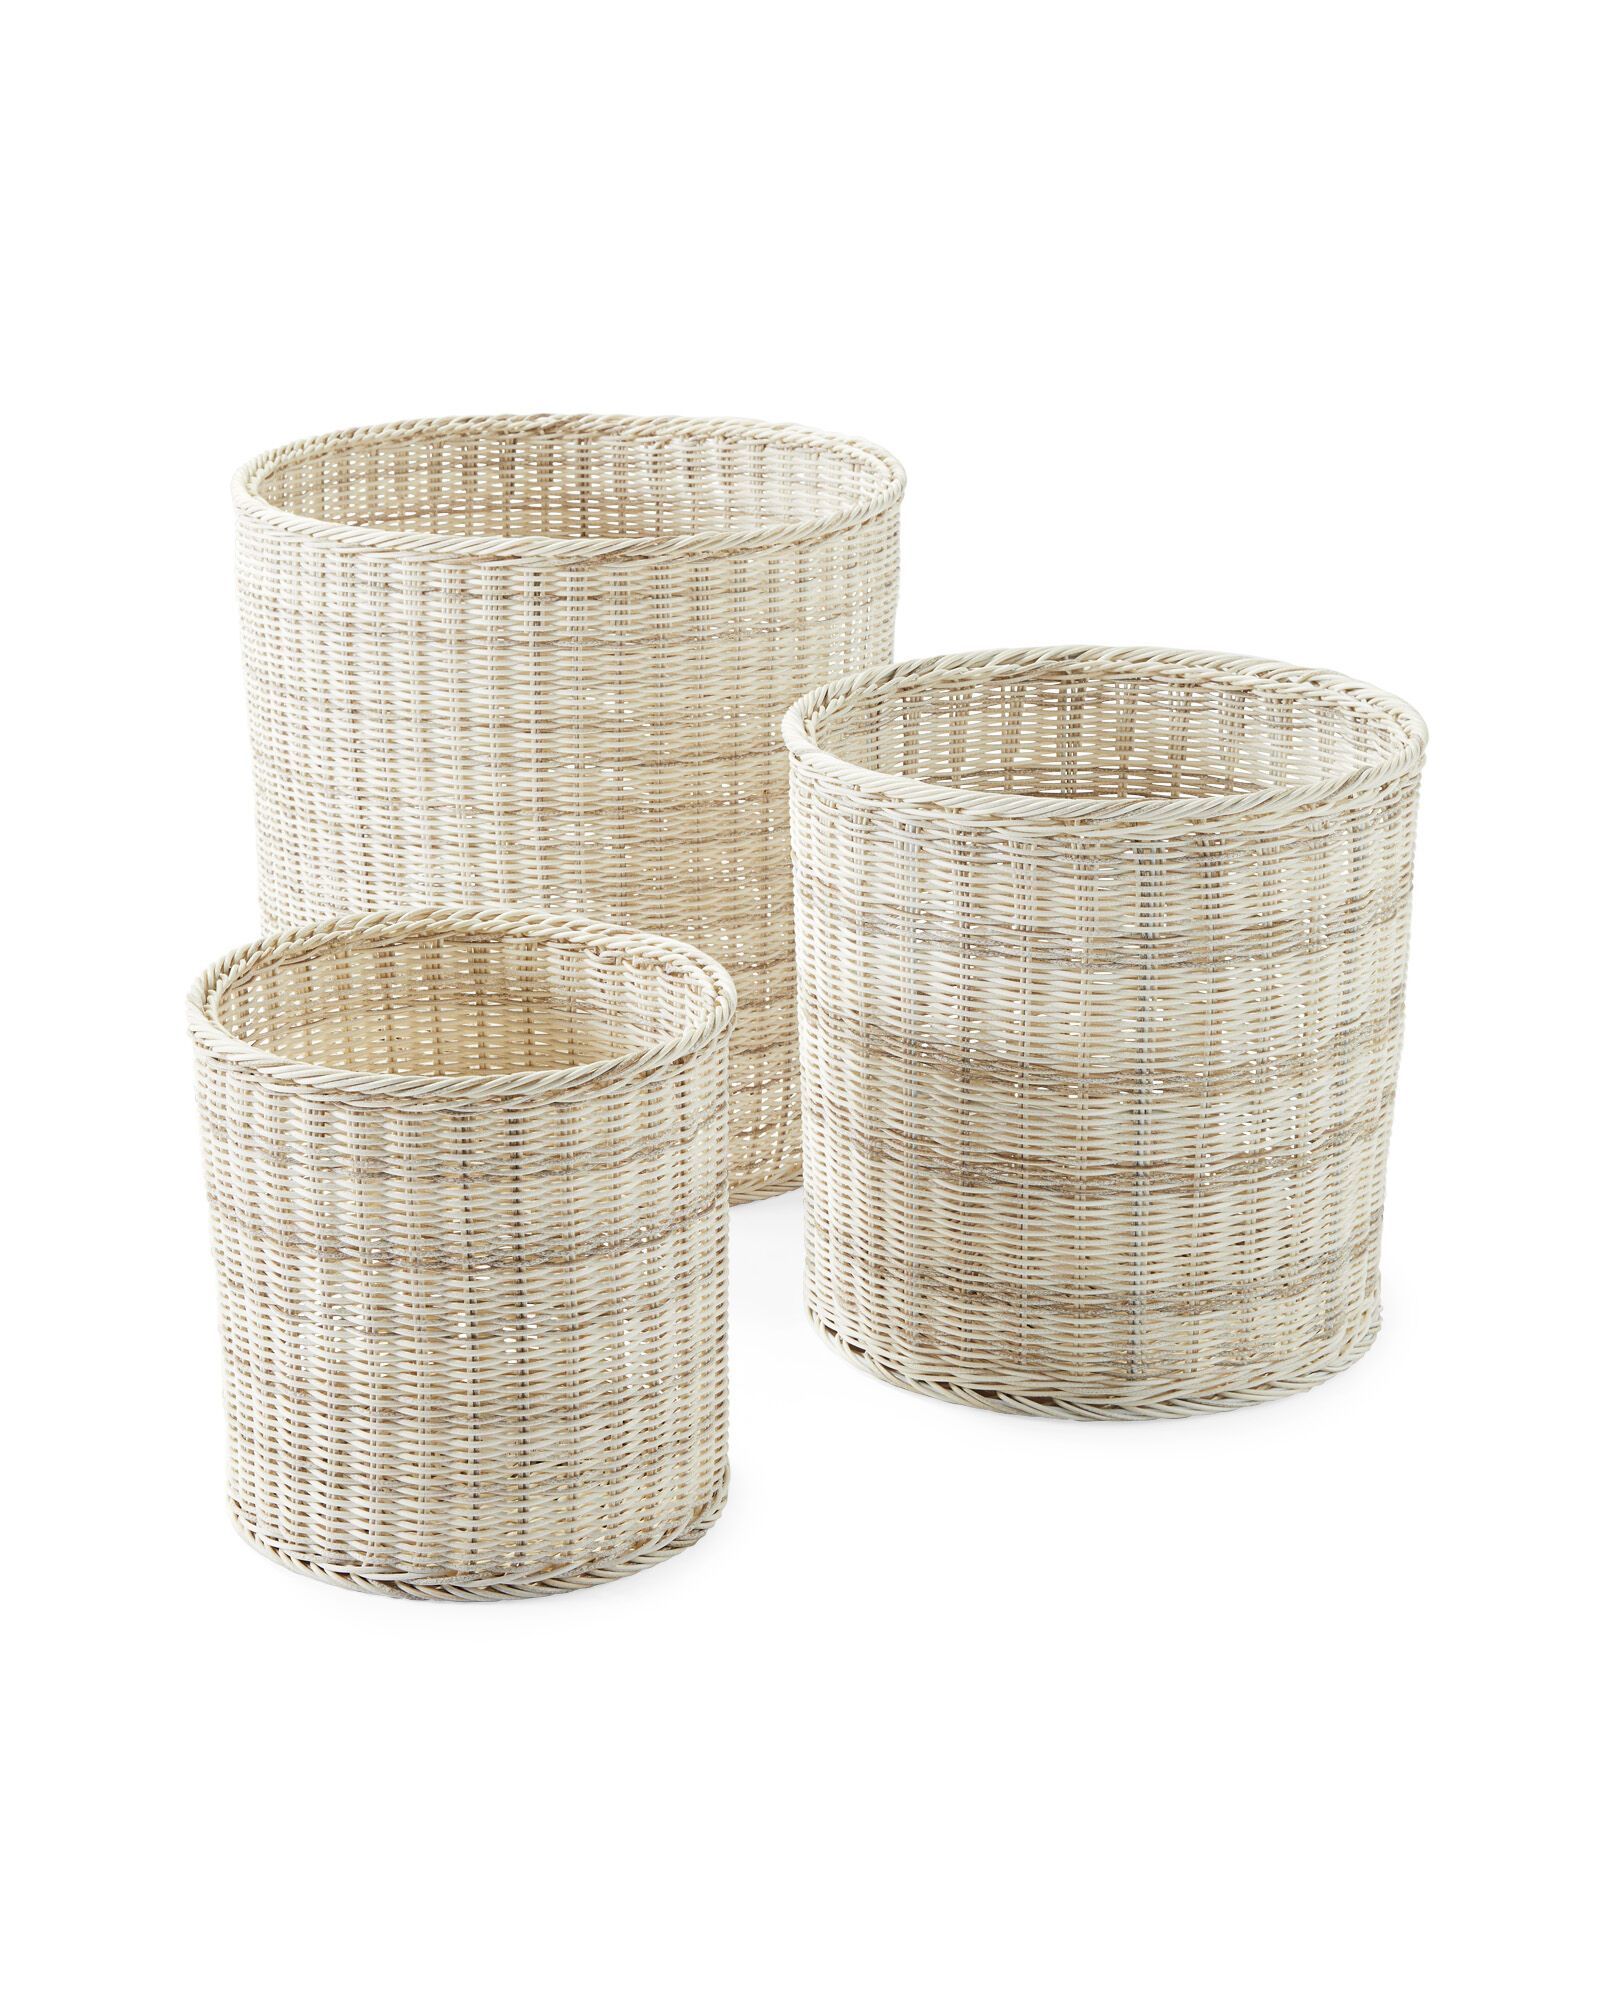 Pacifica Planter | Serena and Lily